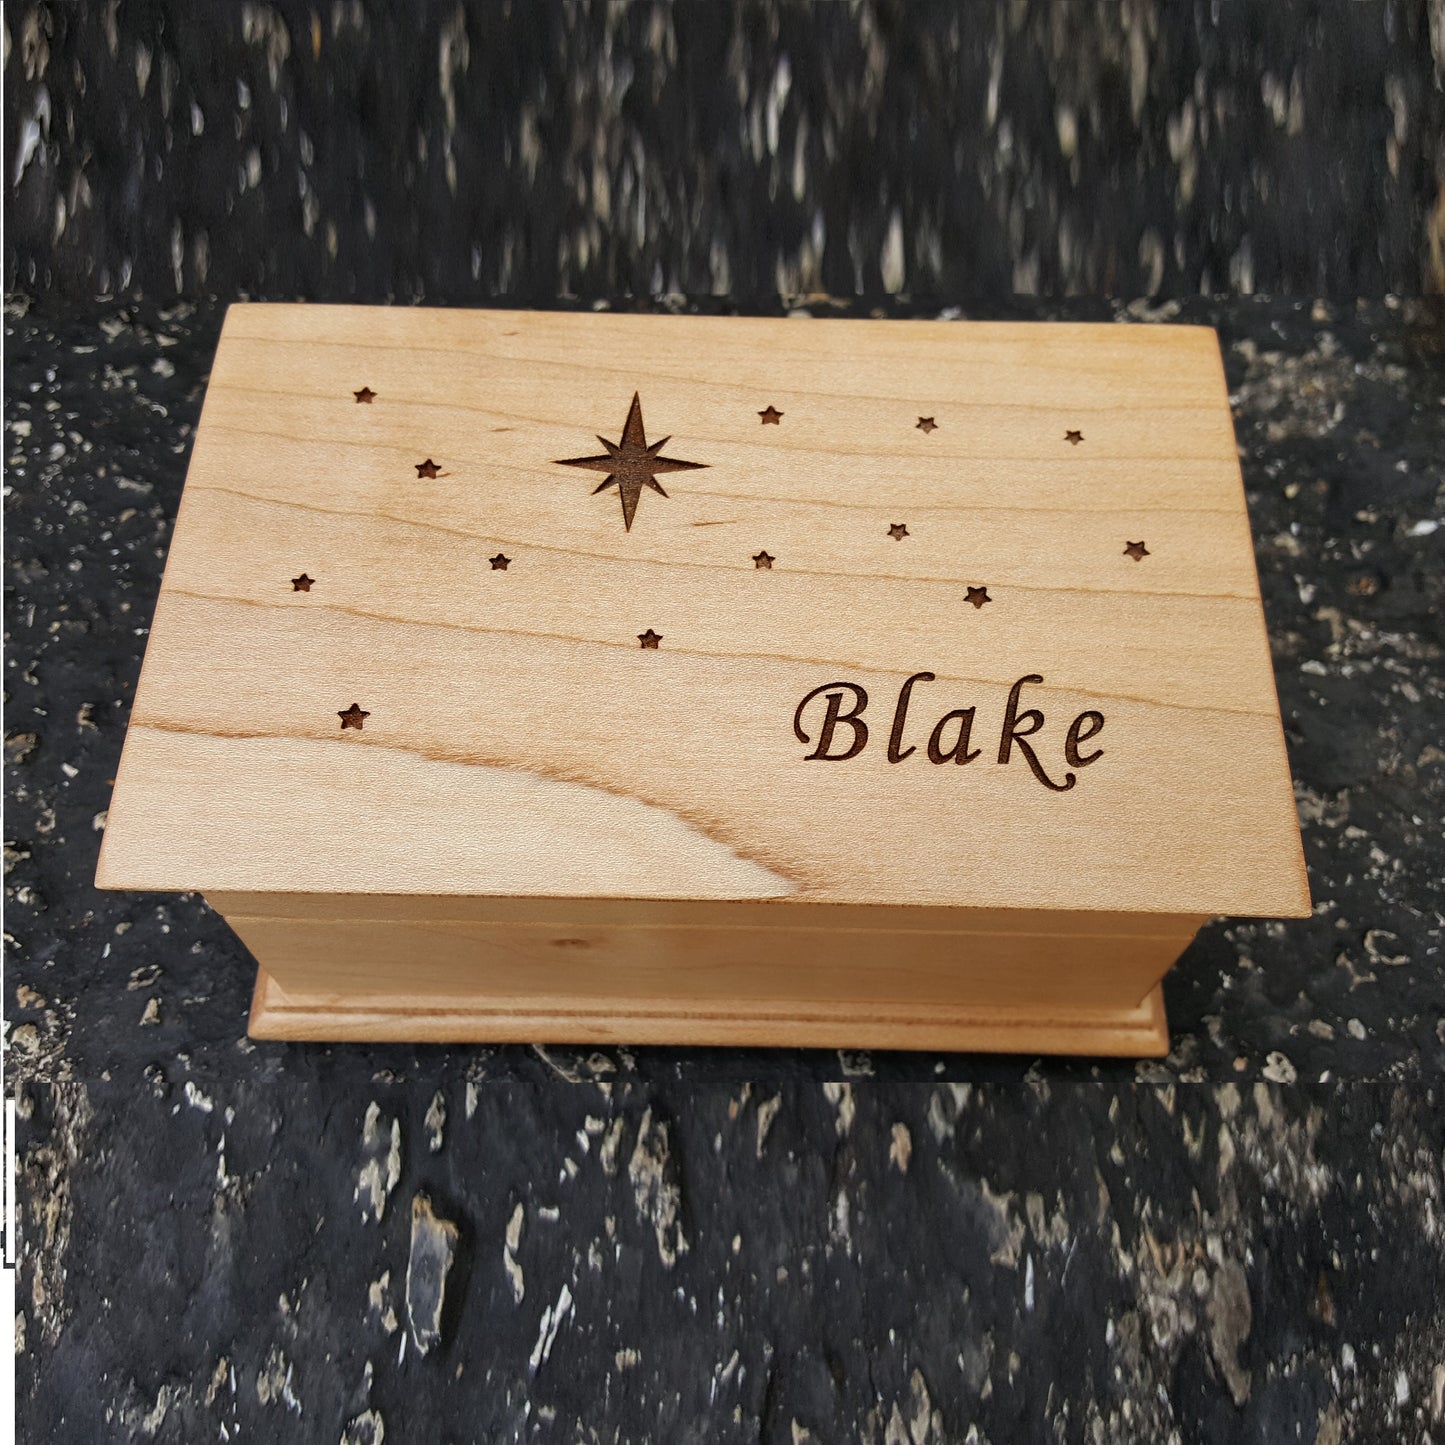 Name Engraved Jewelry box with stars on top with built in music player